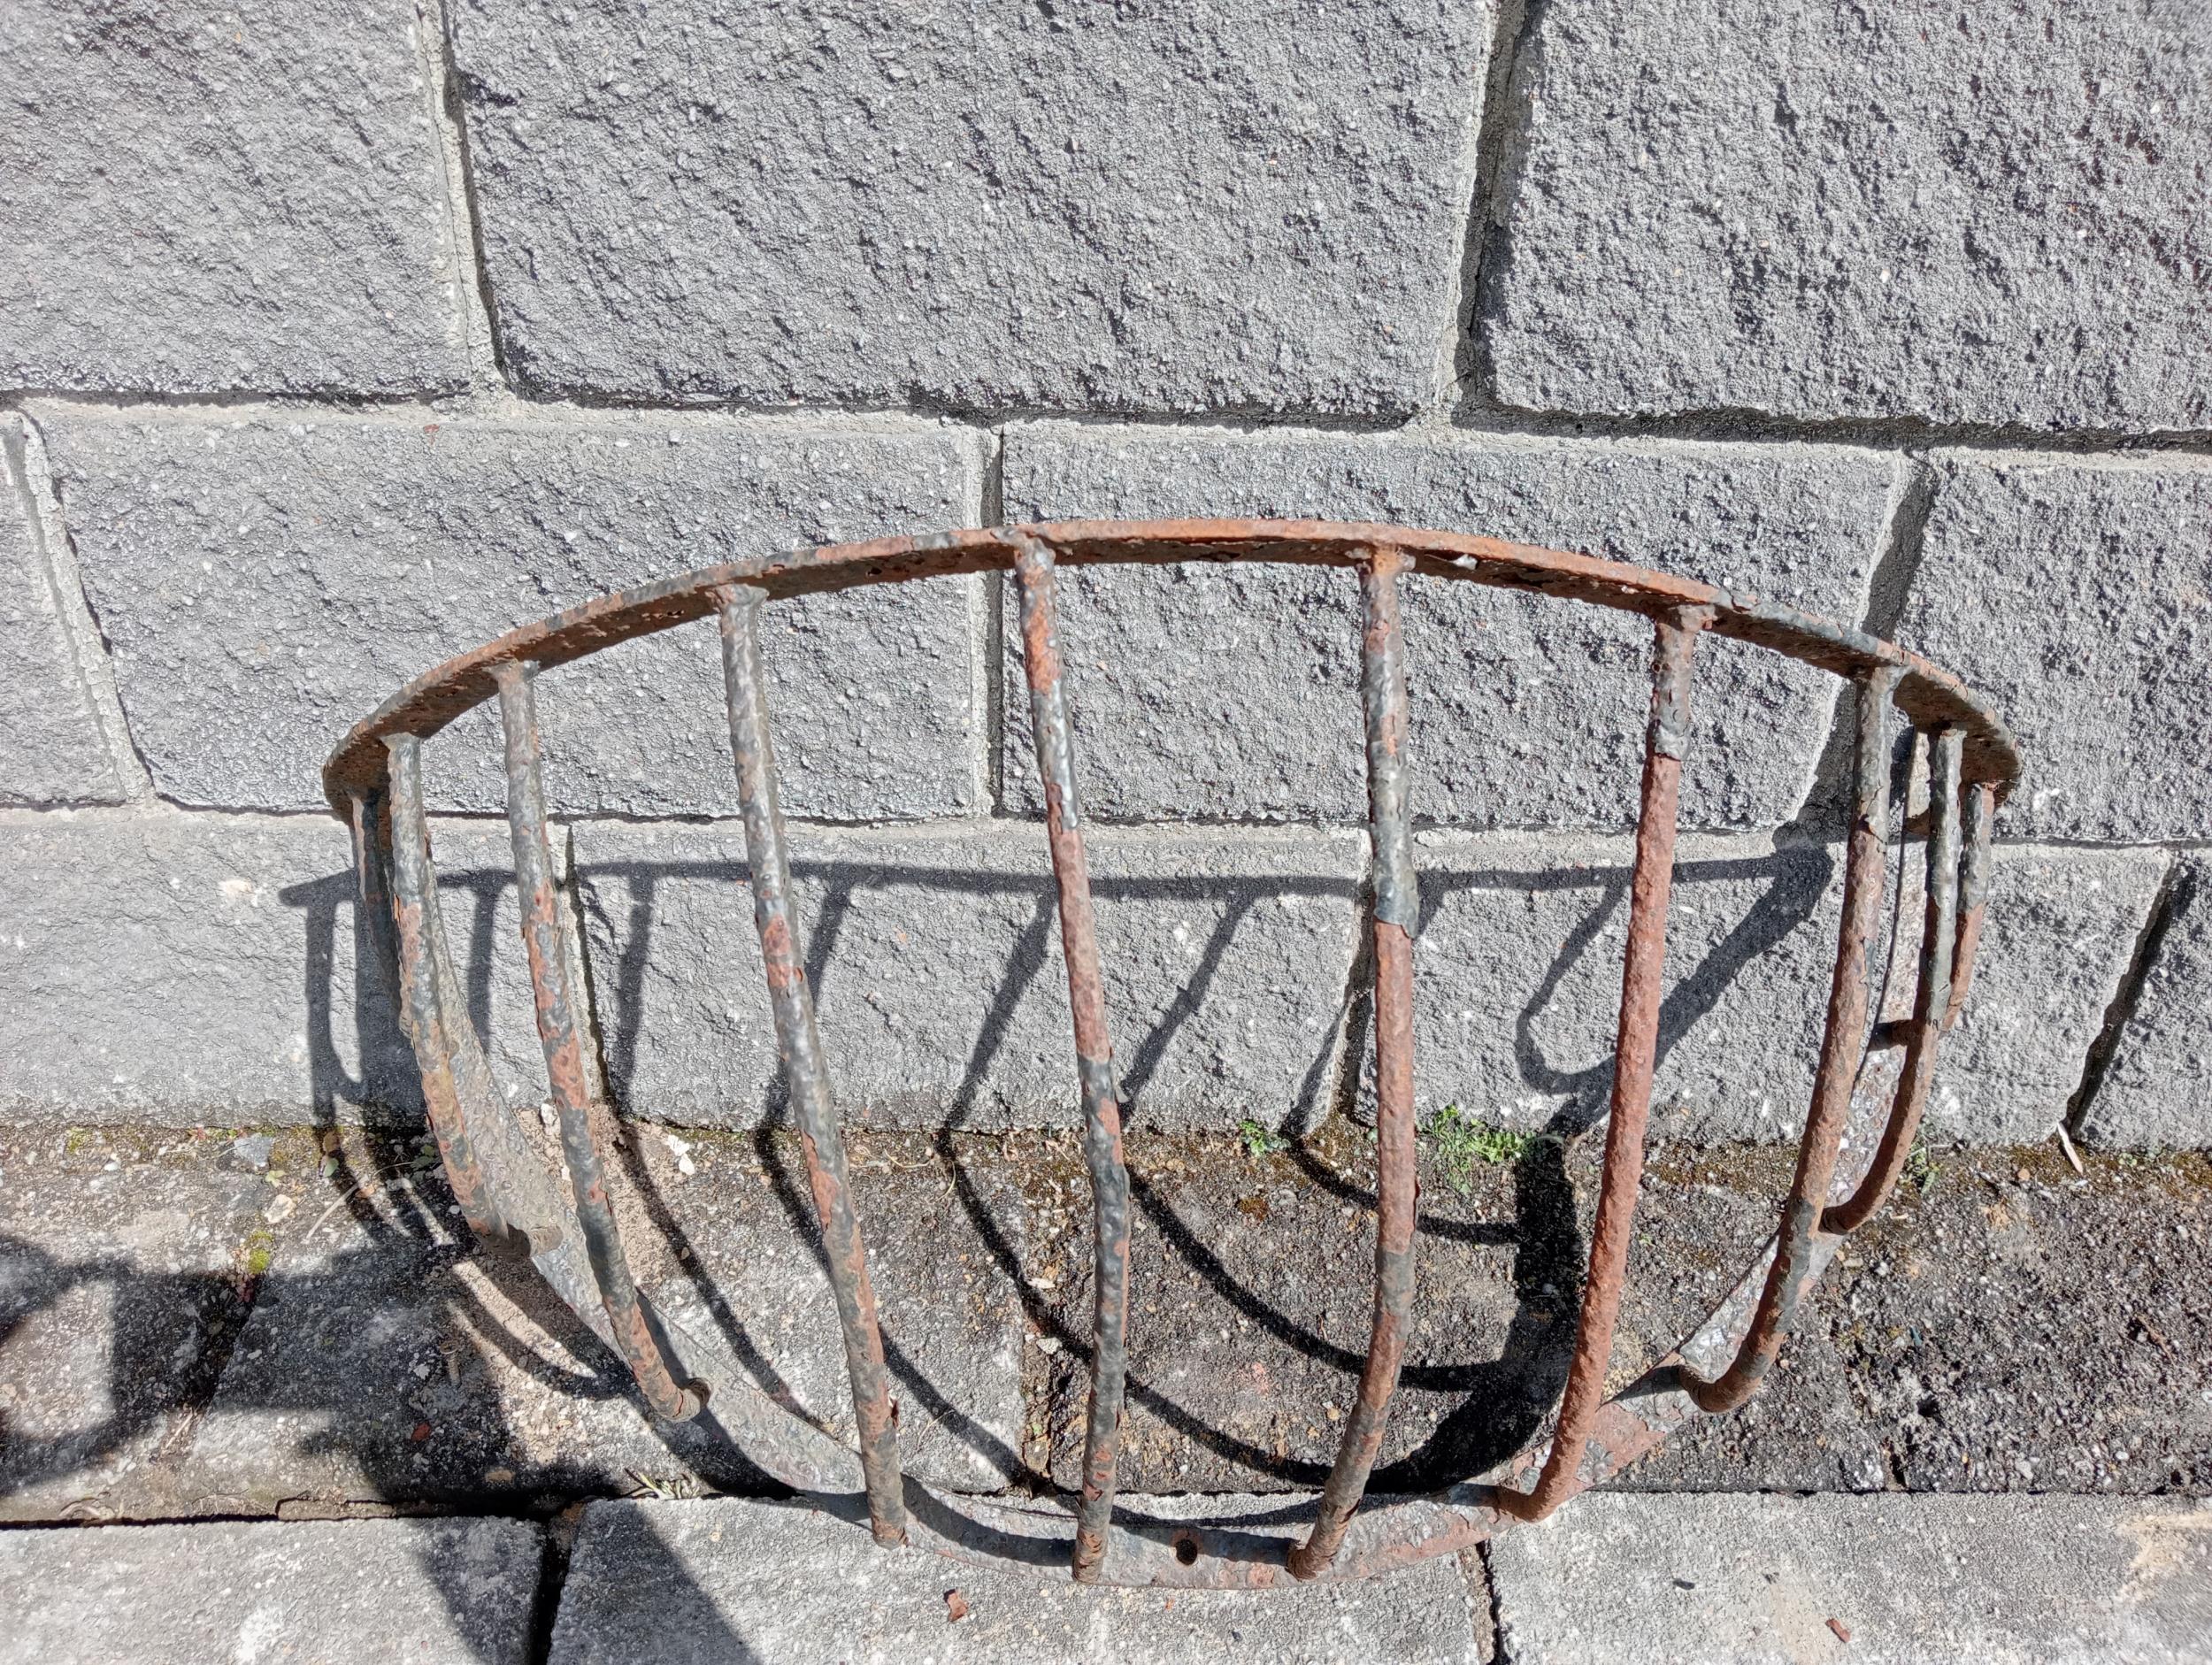 Wrought iron hay feeder corner {H 40cm x W 84cm x D 40cm }. (NOT AVAILABLE TO VIEW IN PERSON)